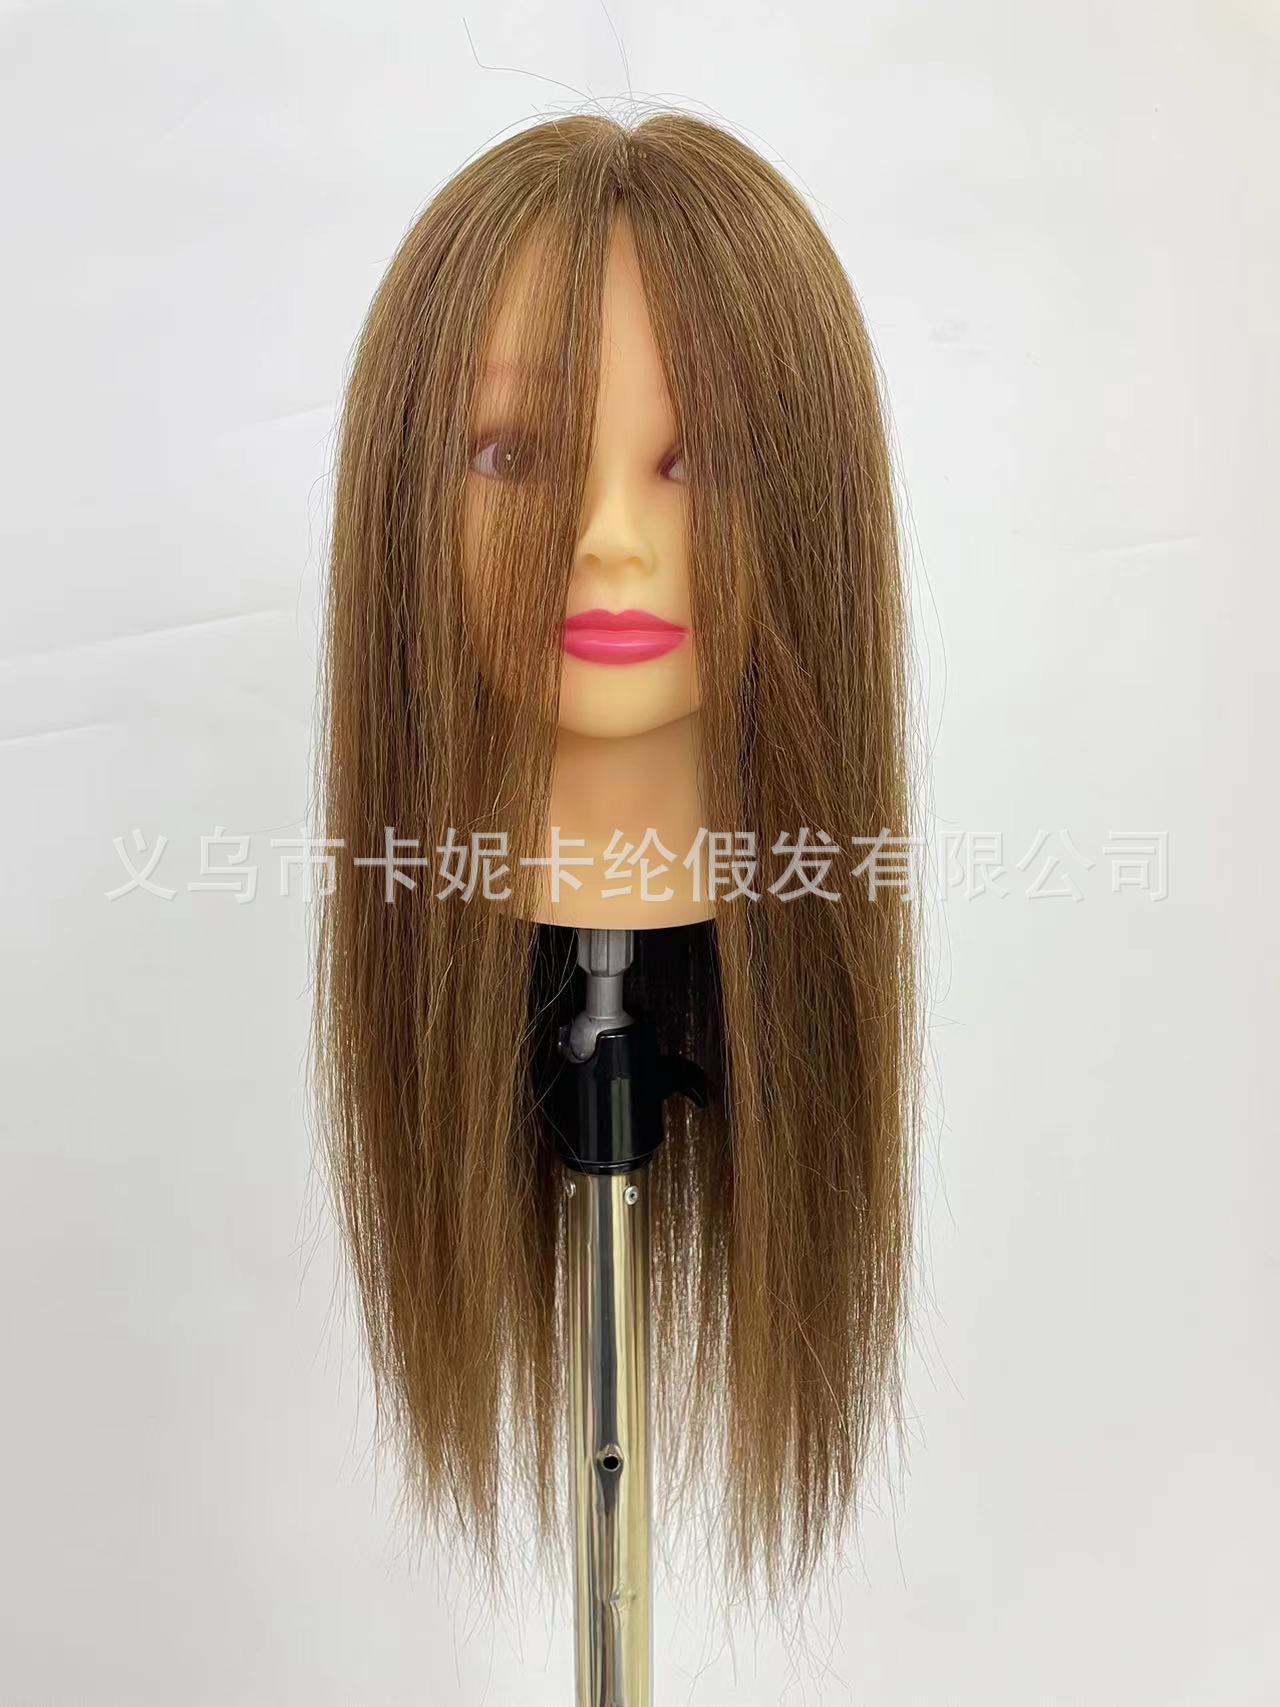 hairdressing can practice cutting and weaving hair updo hair updo head makeup modeling model head manufacturer real human hair newlook